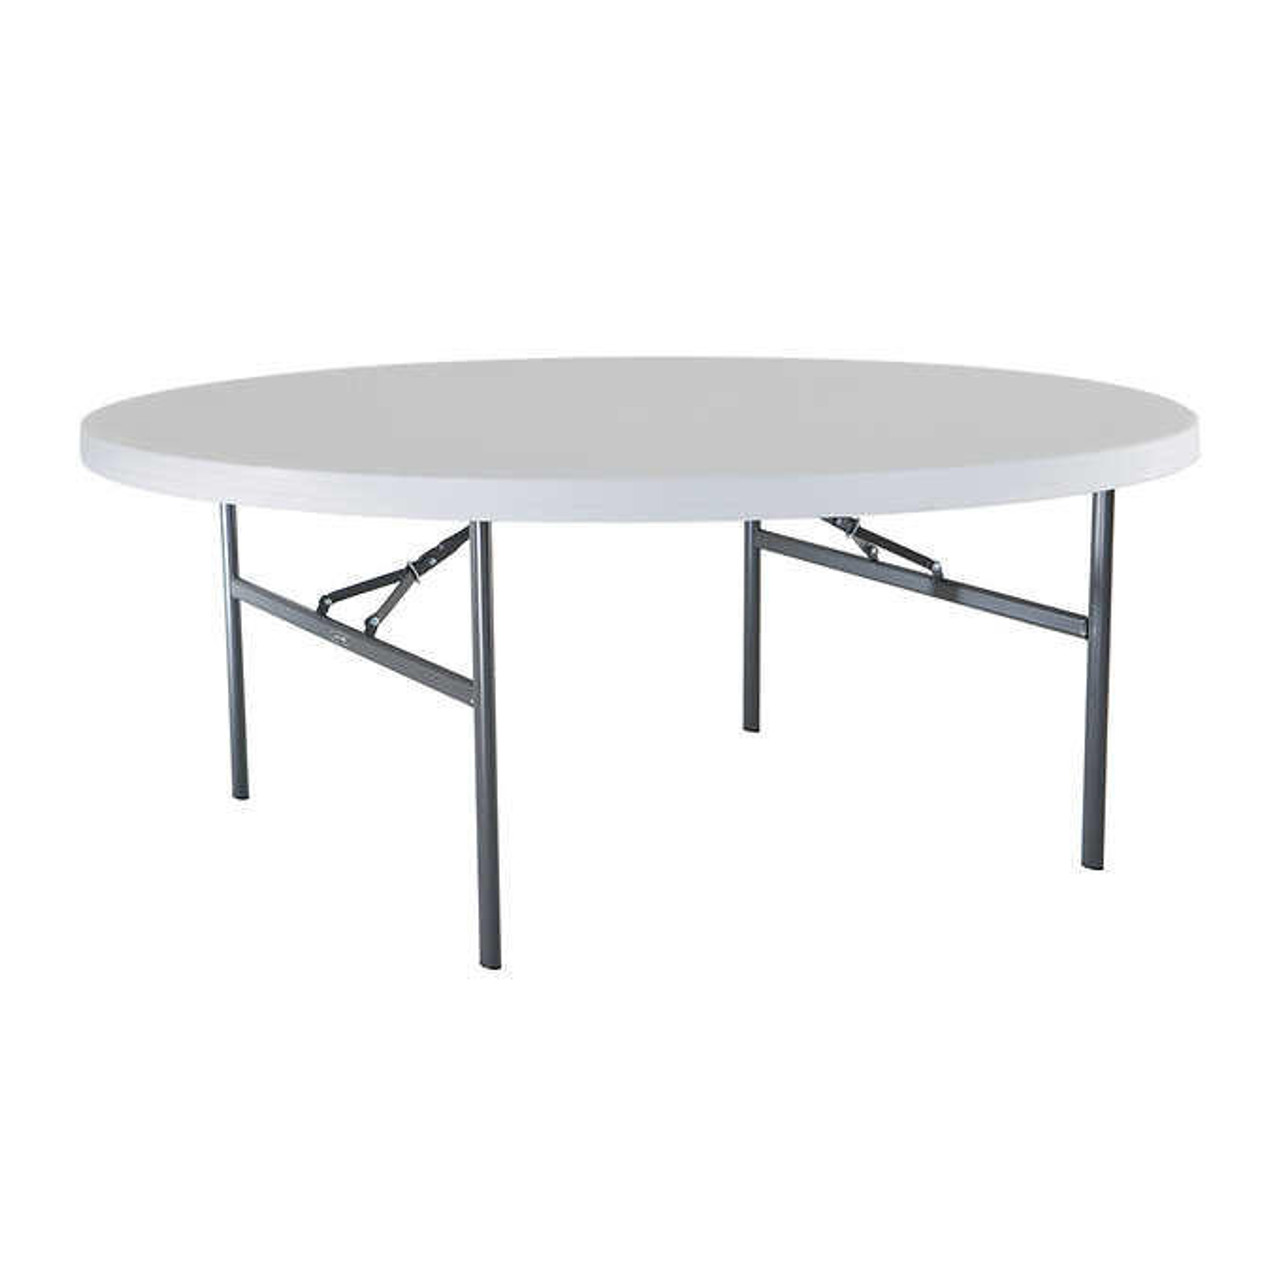 LIFETIME Lifetime Commercial 8 Round Tables 182.9 cm (72 in.) with 1 Table Cart 